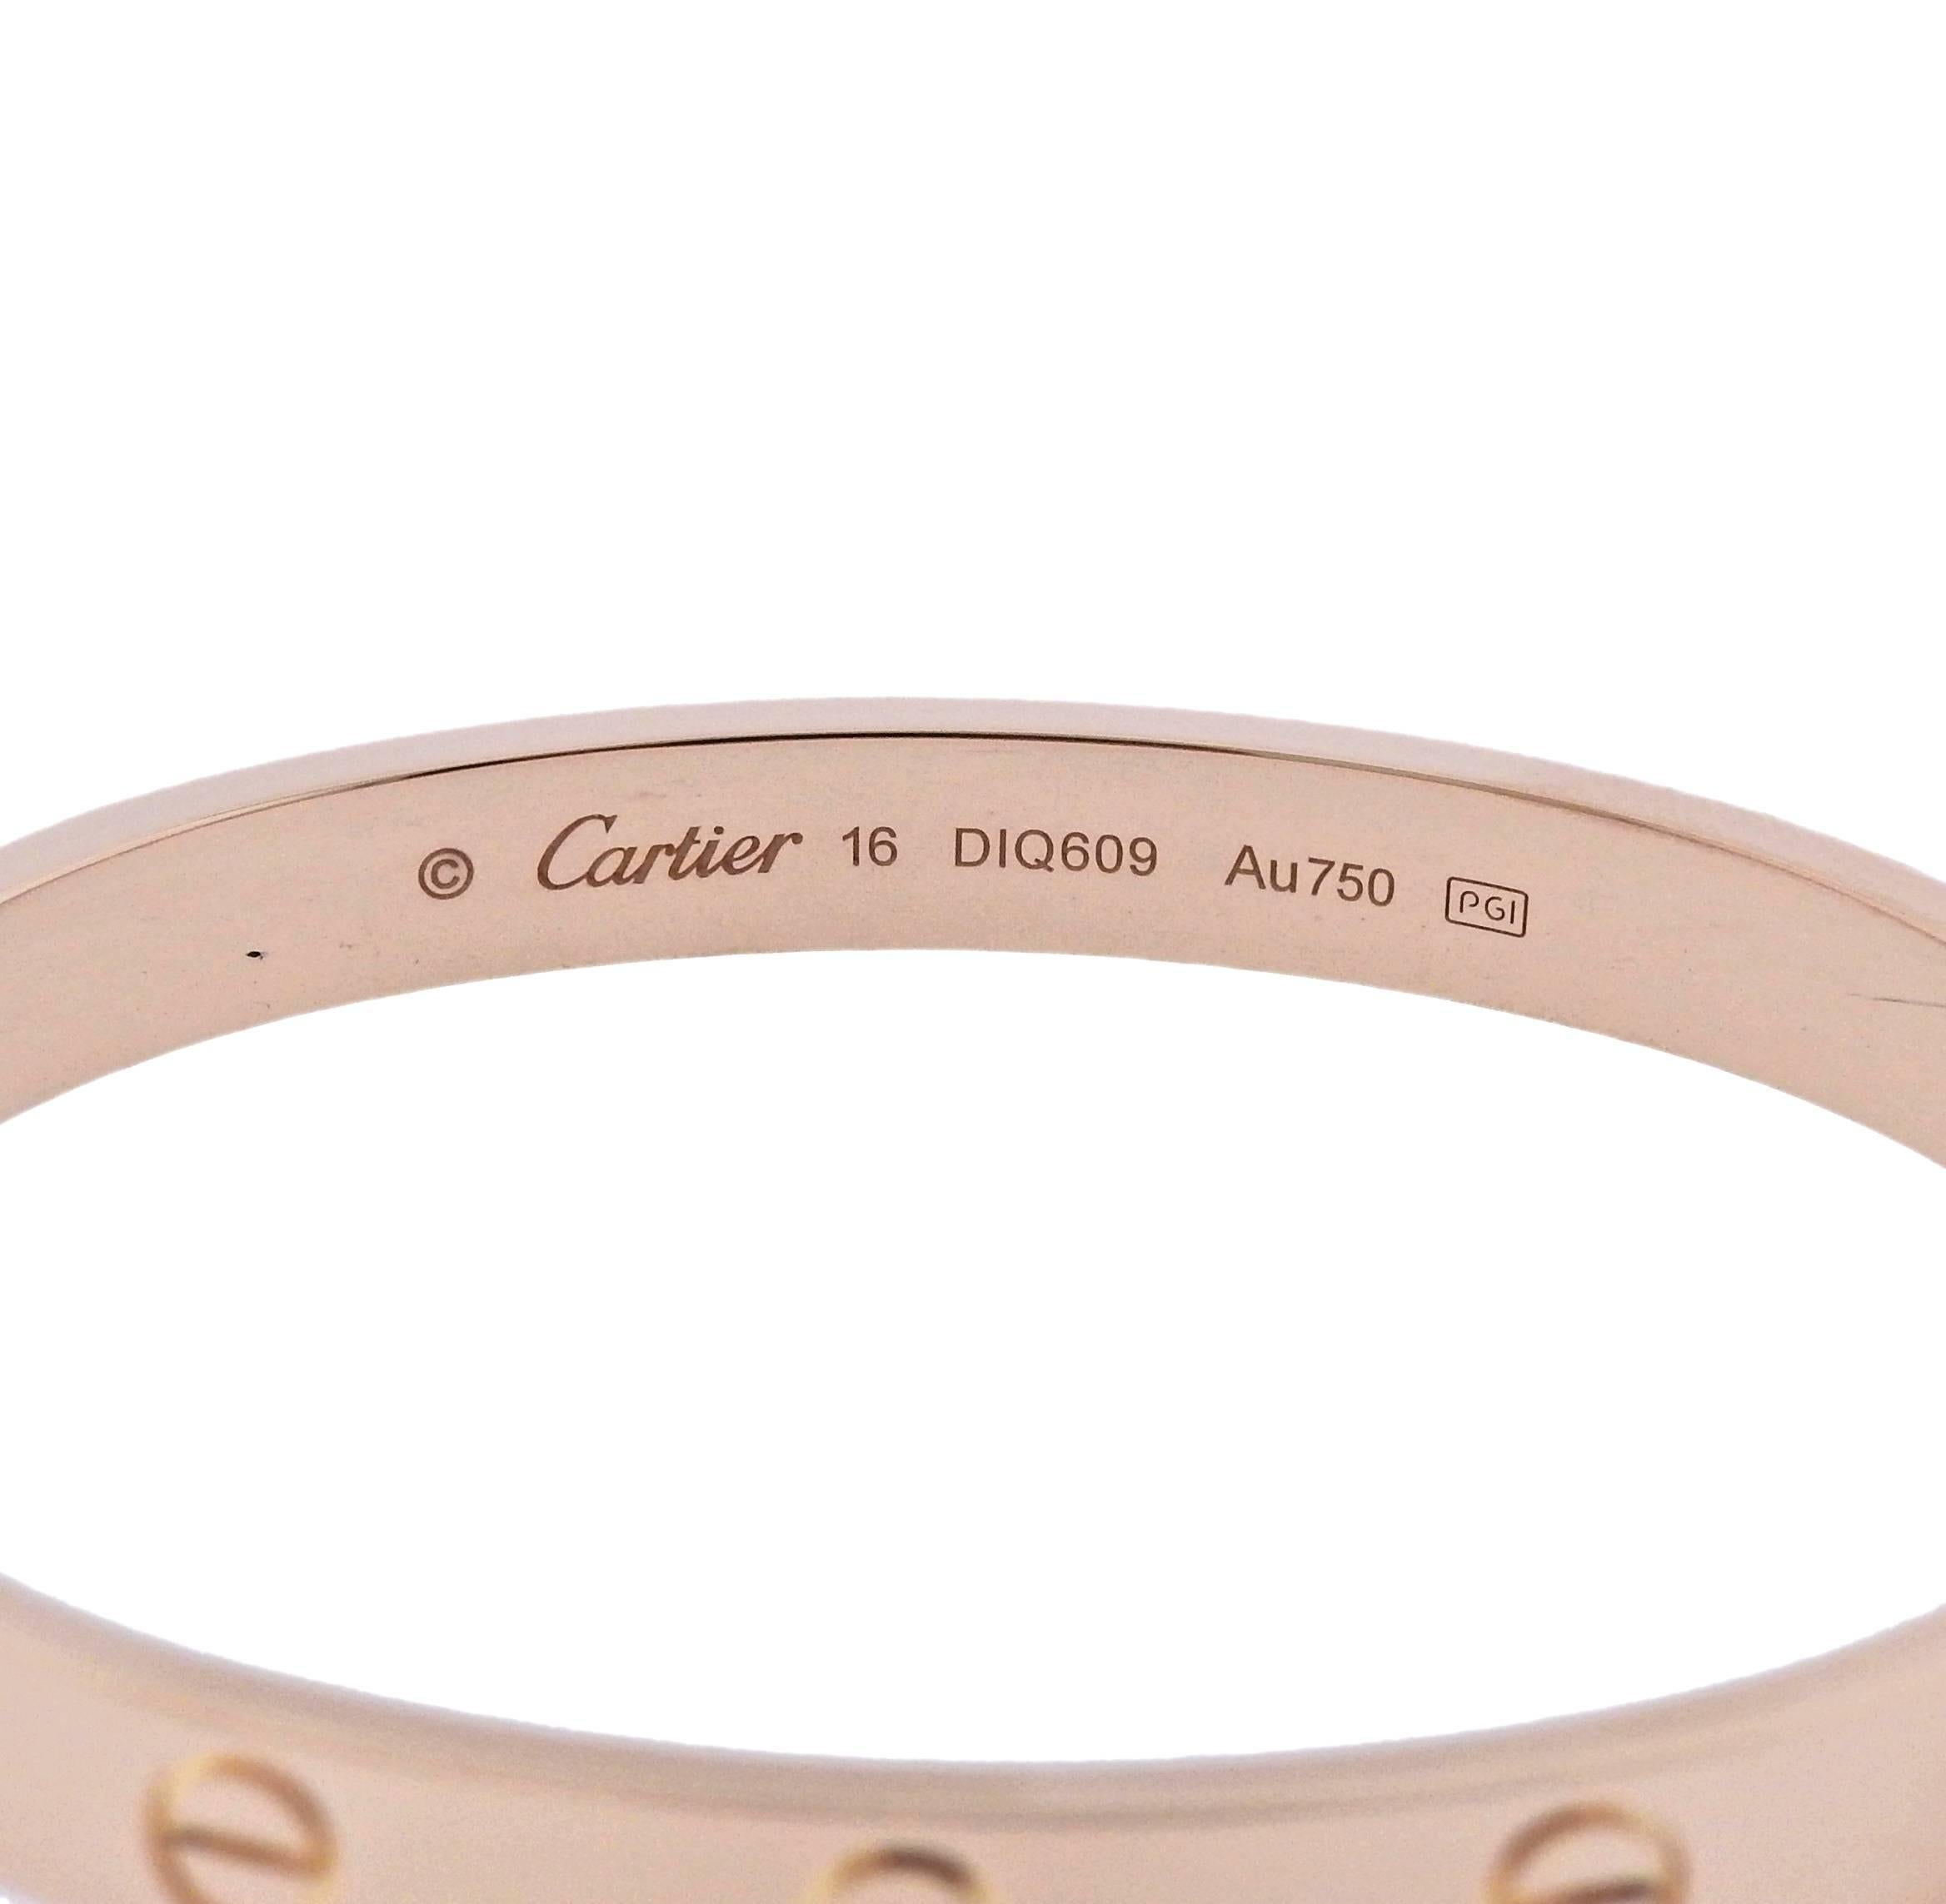  Iconic 18k rose gold Love bangle, crafted by Cartier. Retails for $6300, bracelet comes with , screwdriver and a box. Bracelet is Cartier size 16, will fit approx. 6.5